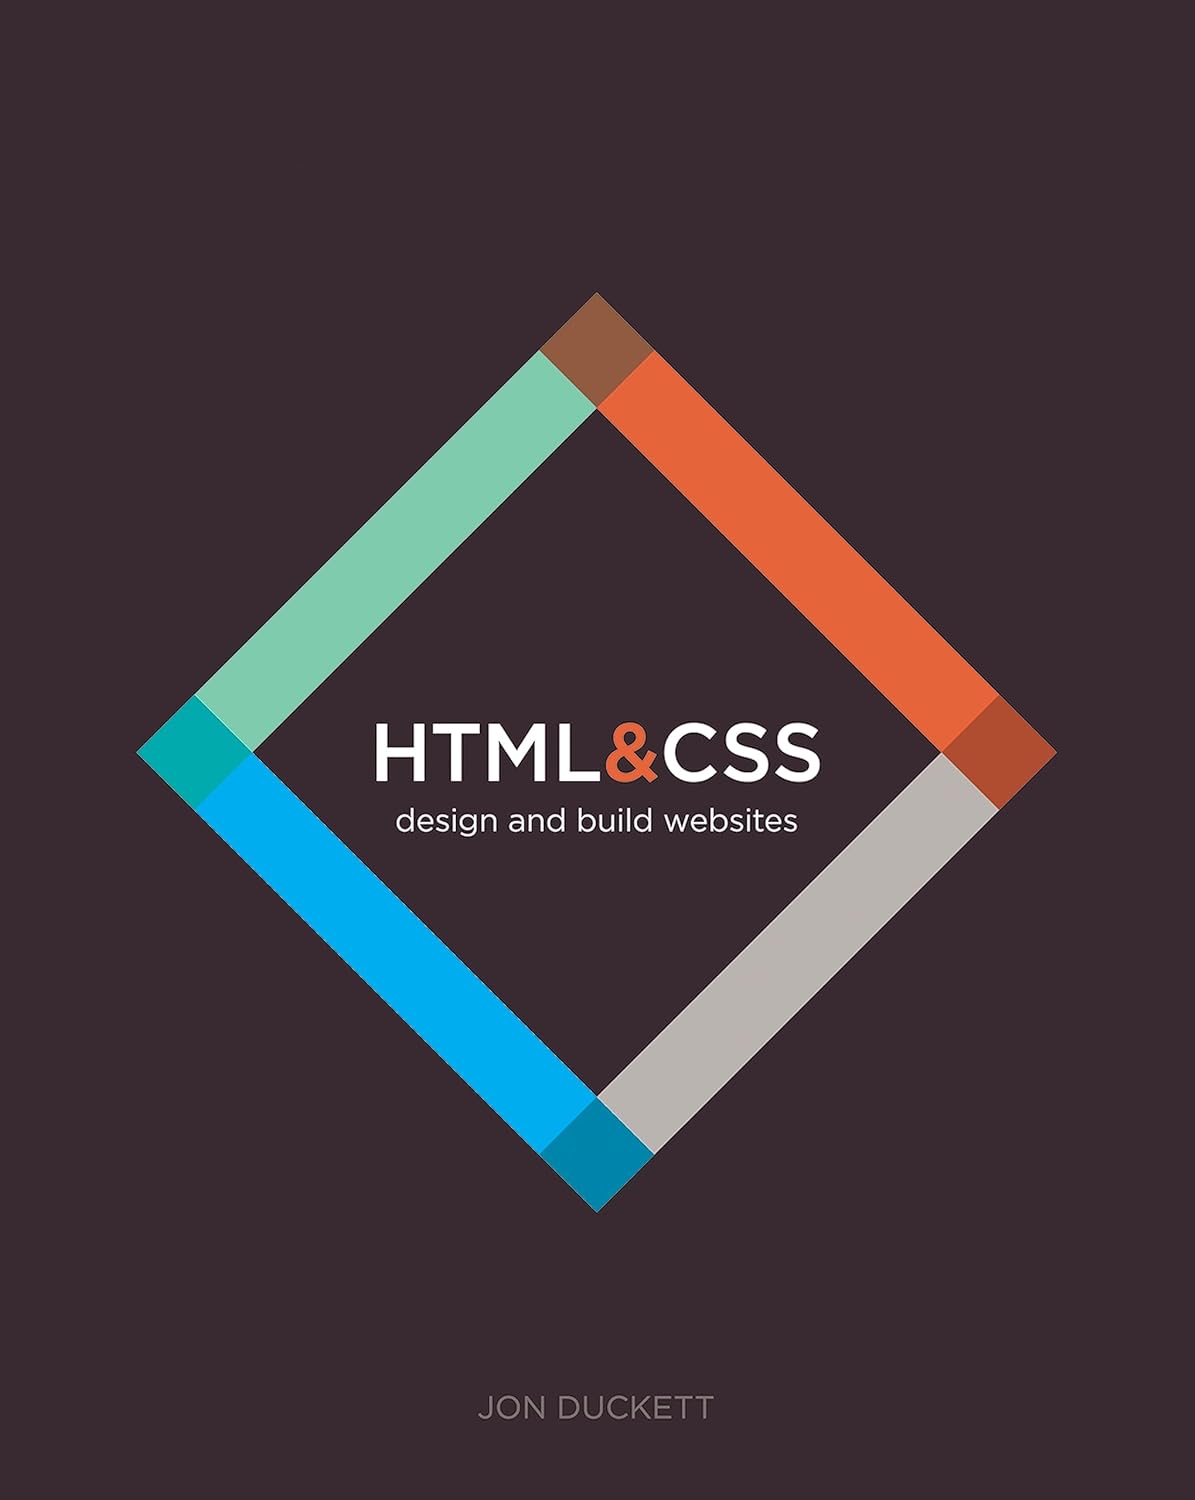 HTML & CSS design and build websites